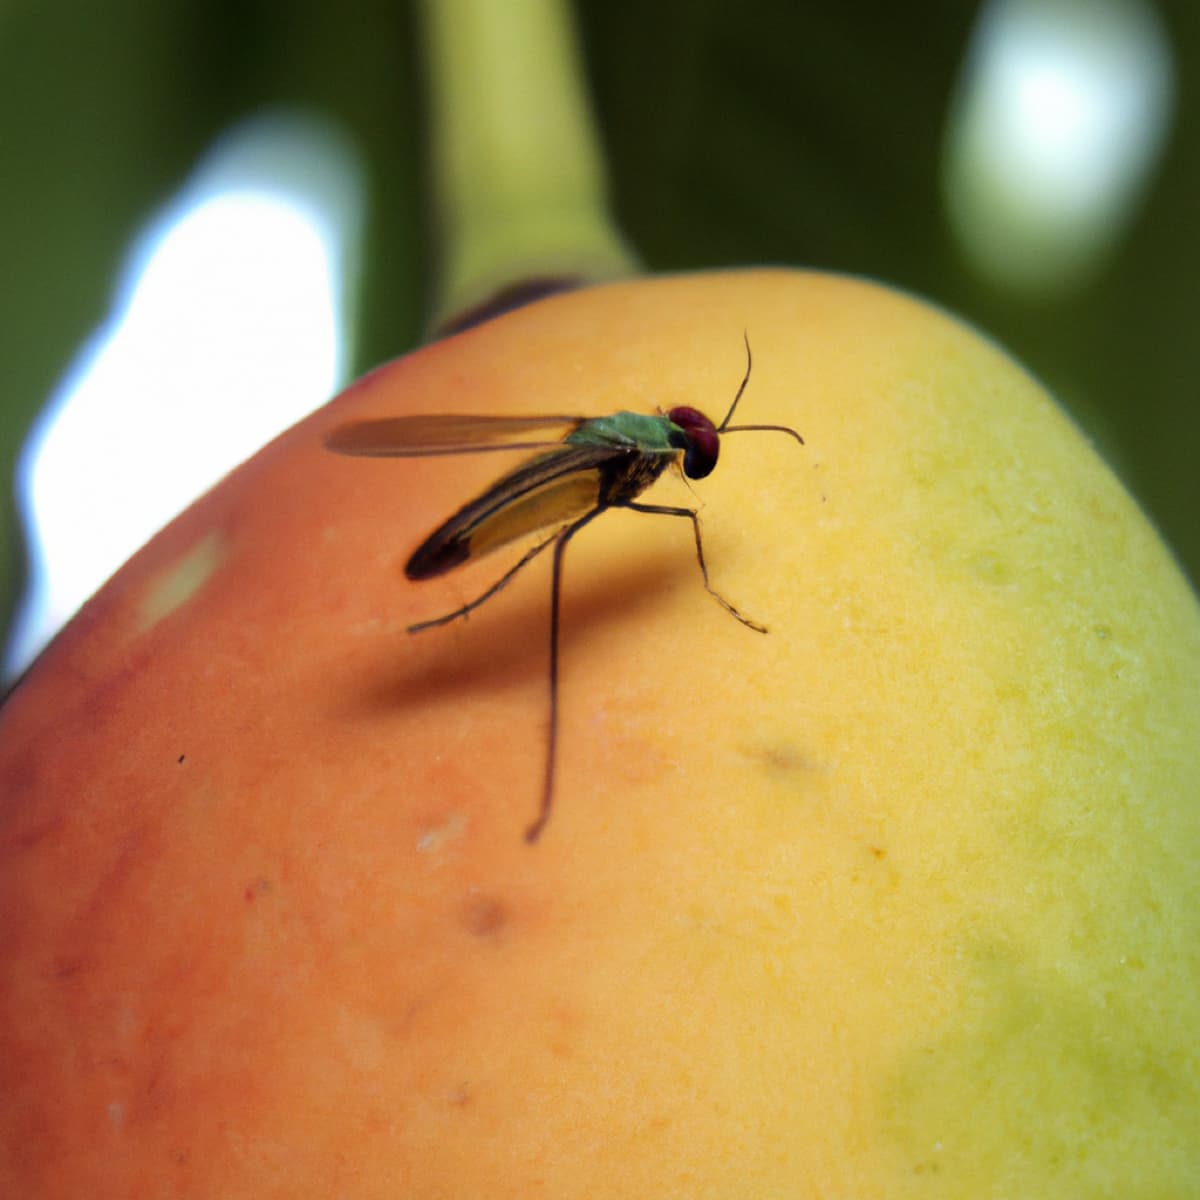 Key Rules to Get Rid of Fruit Fly in Mango